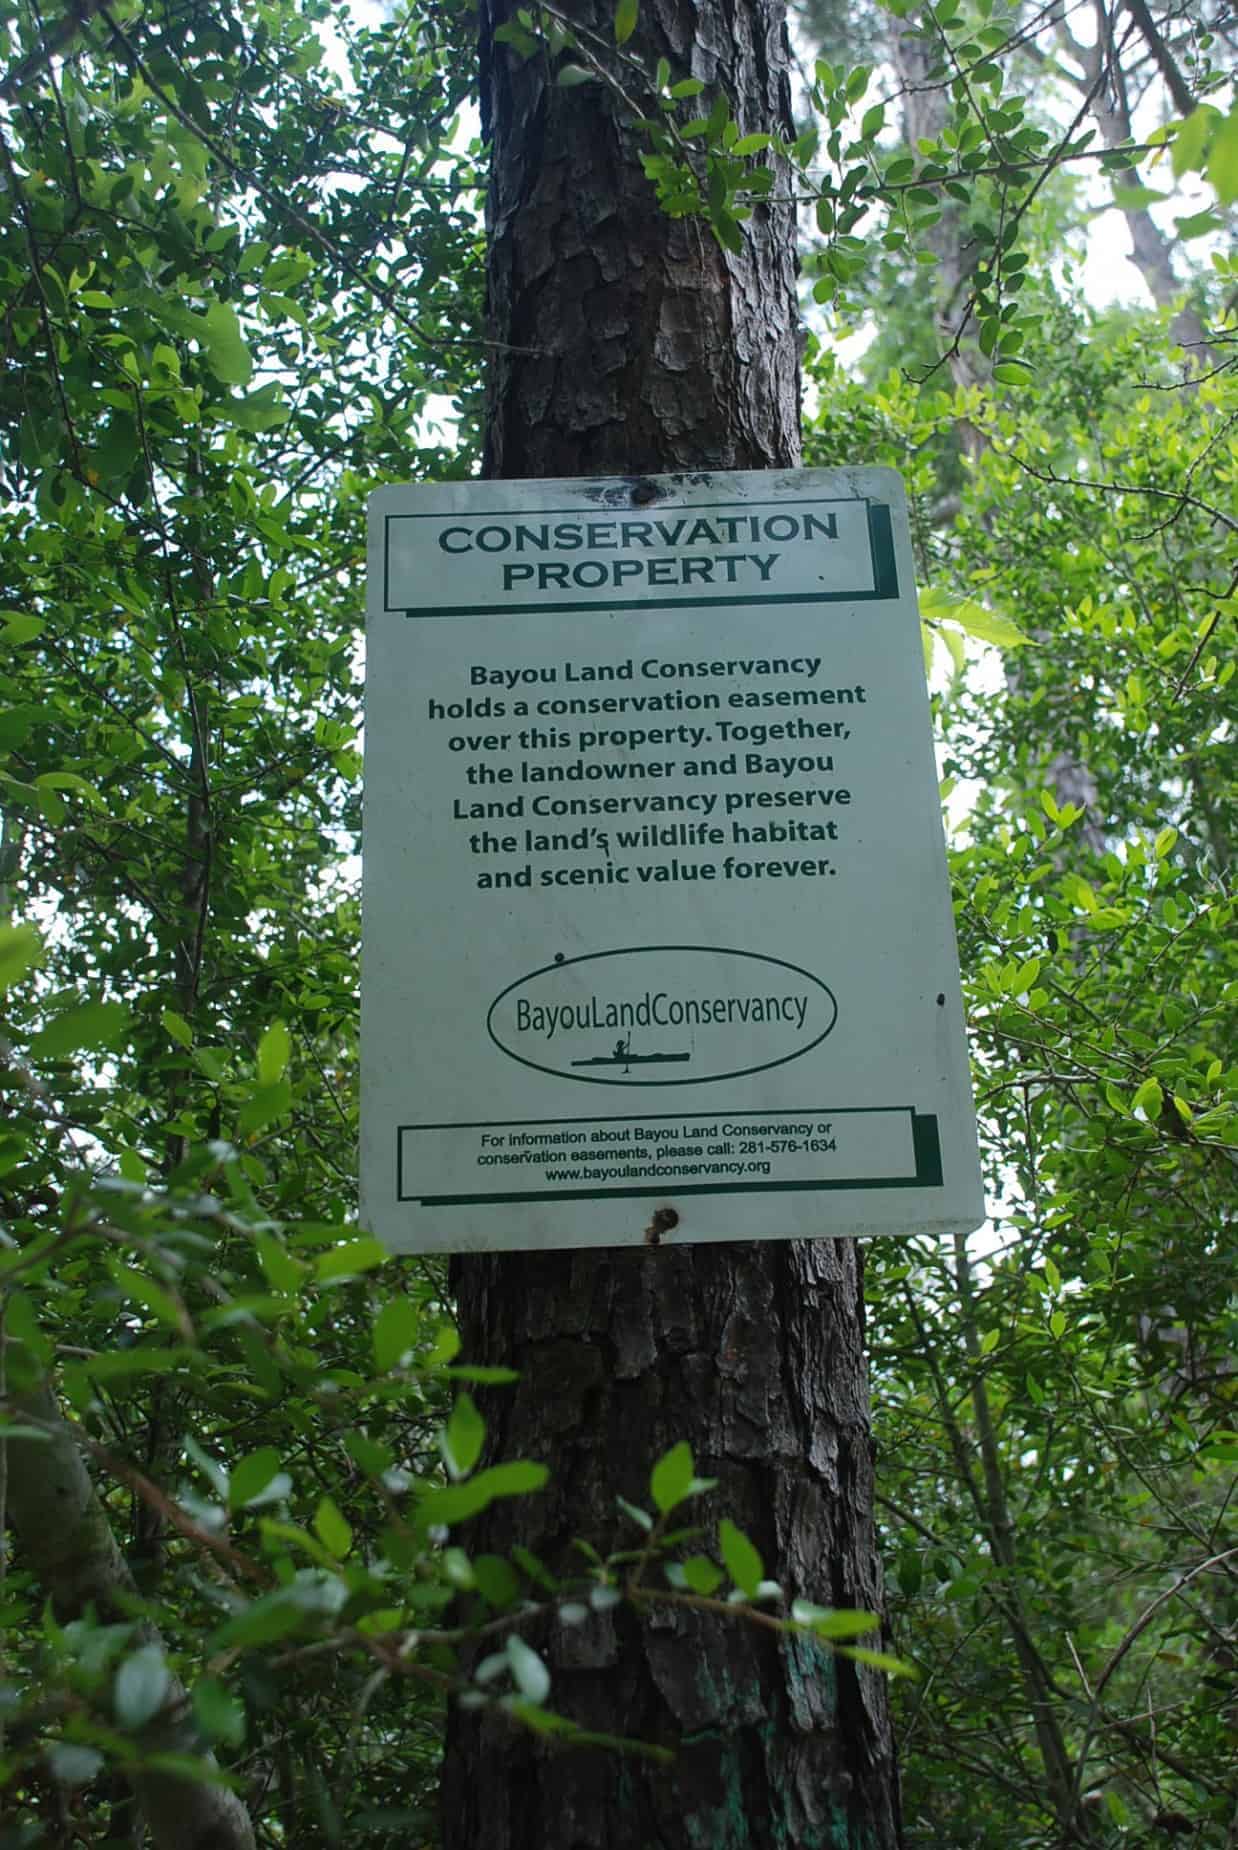 Signage concerning the Bayou Land Concervancy easement held over the 100 Acre Wood Preserve Houston TX property